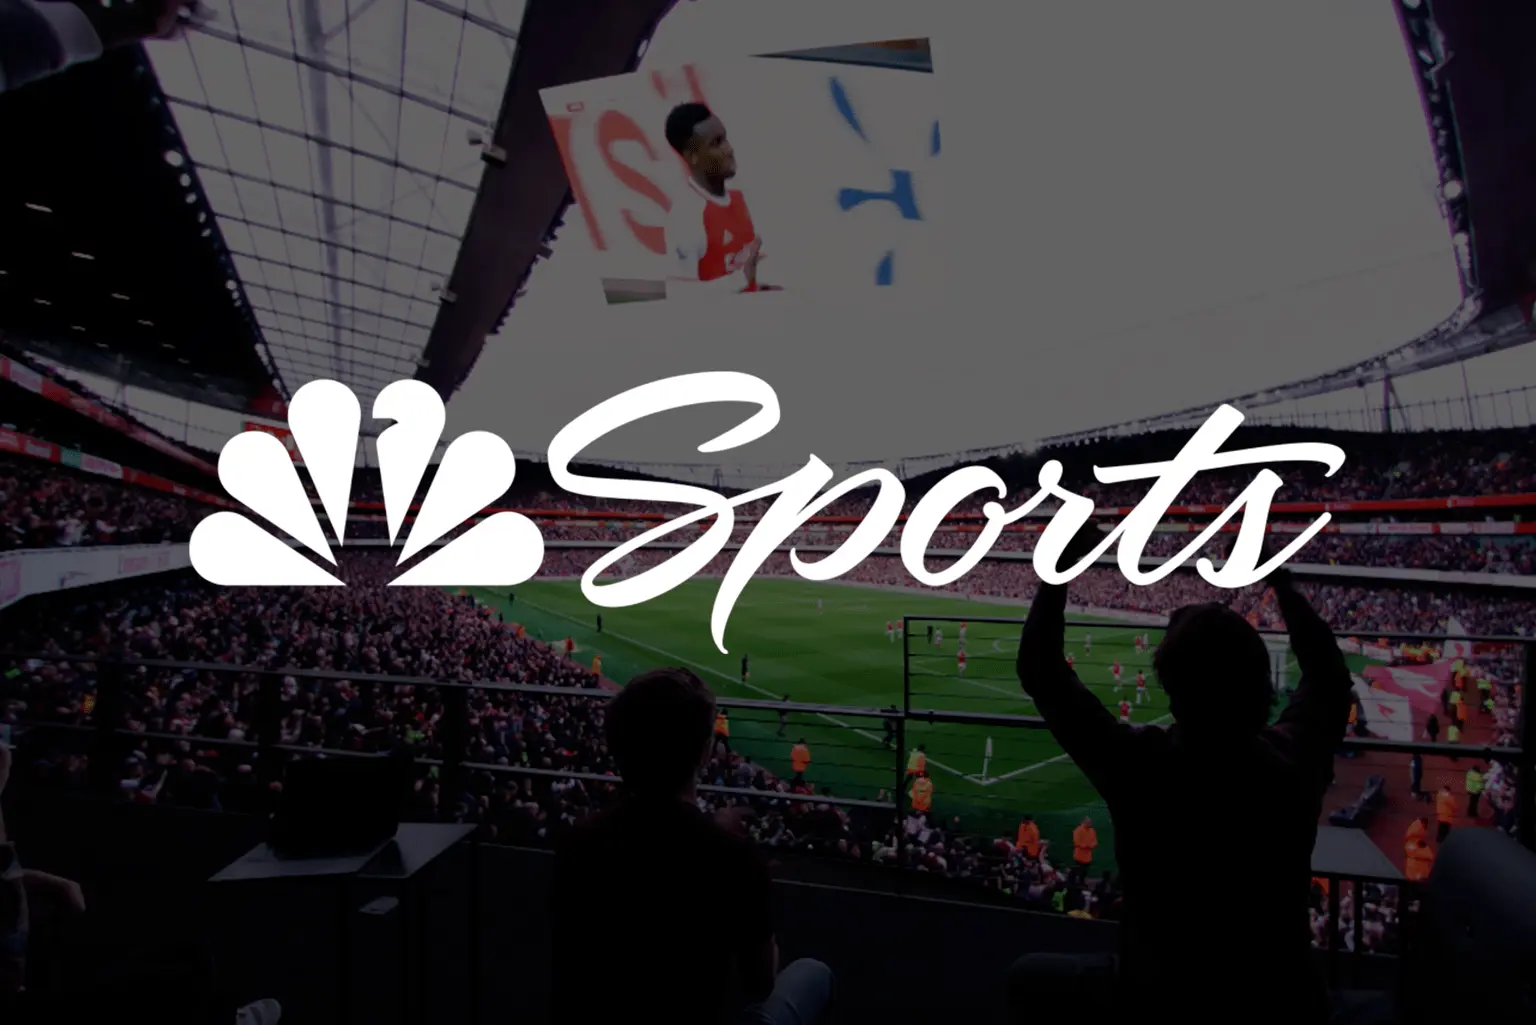 NBC Sports logo on Dome Rendering of Football Match